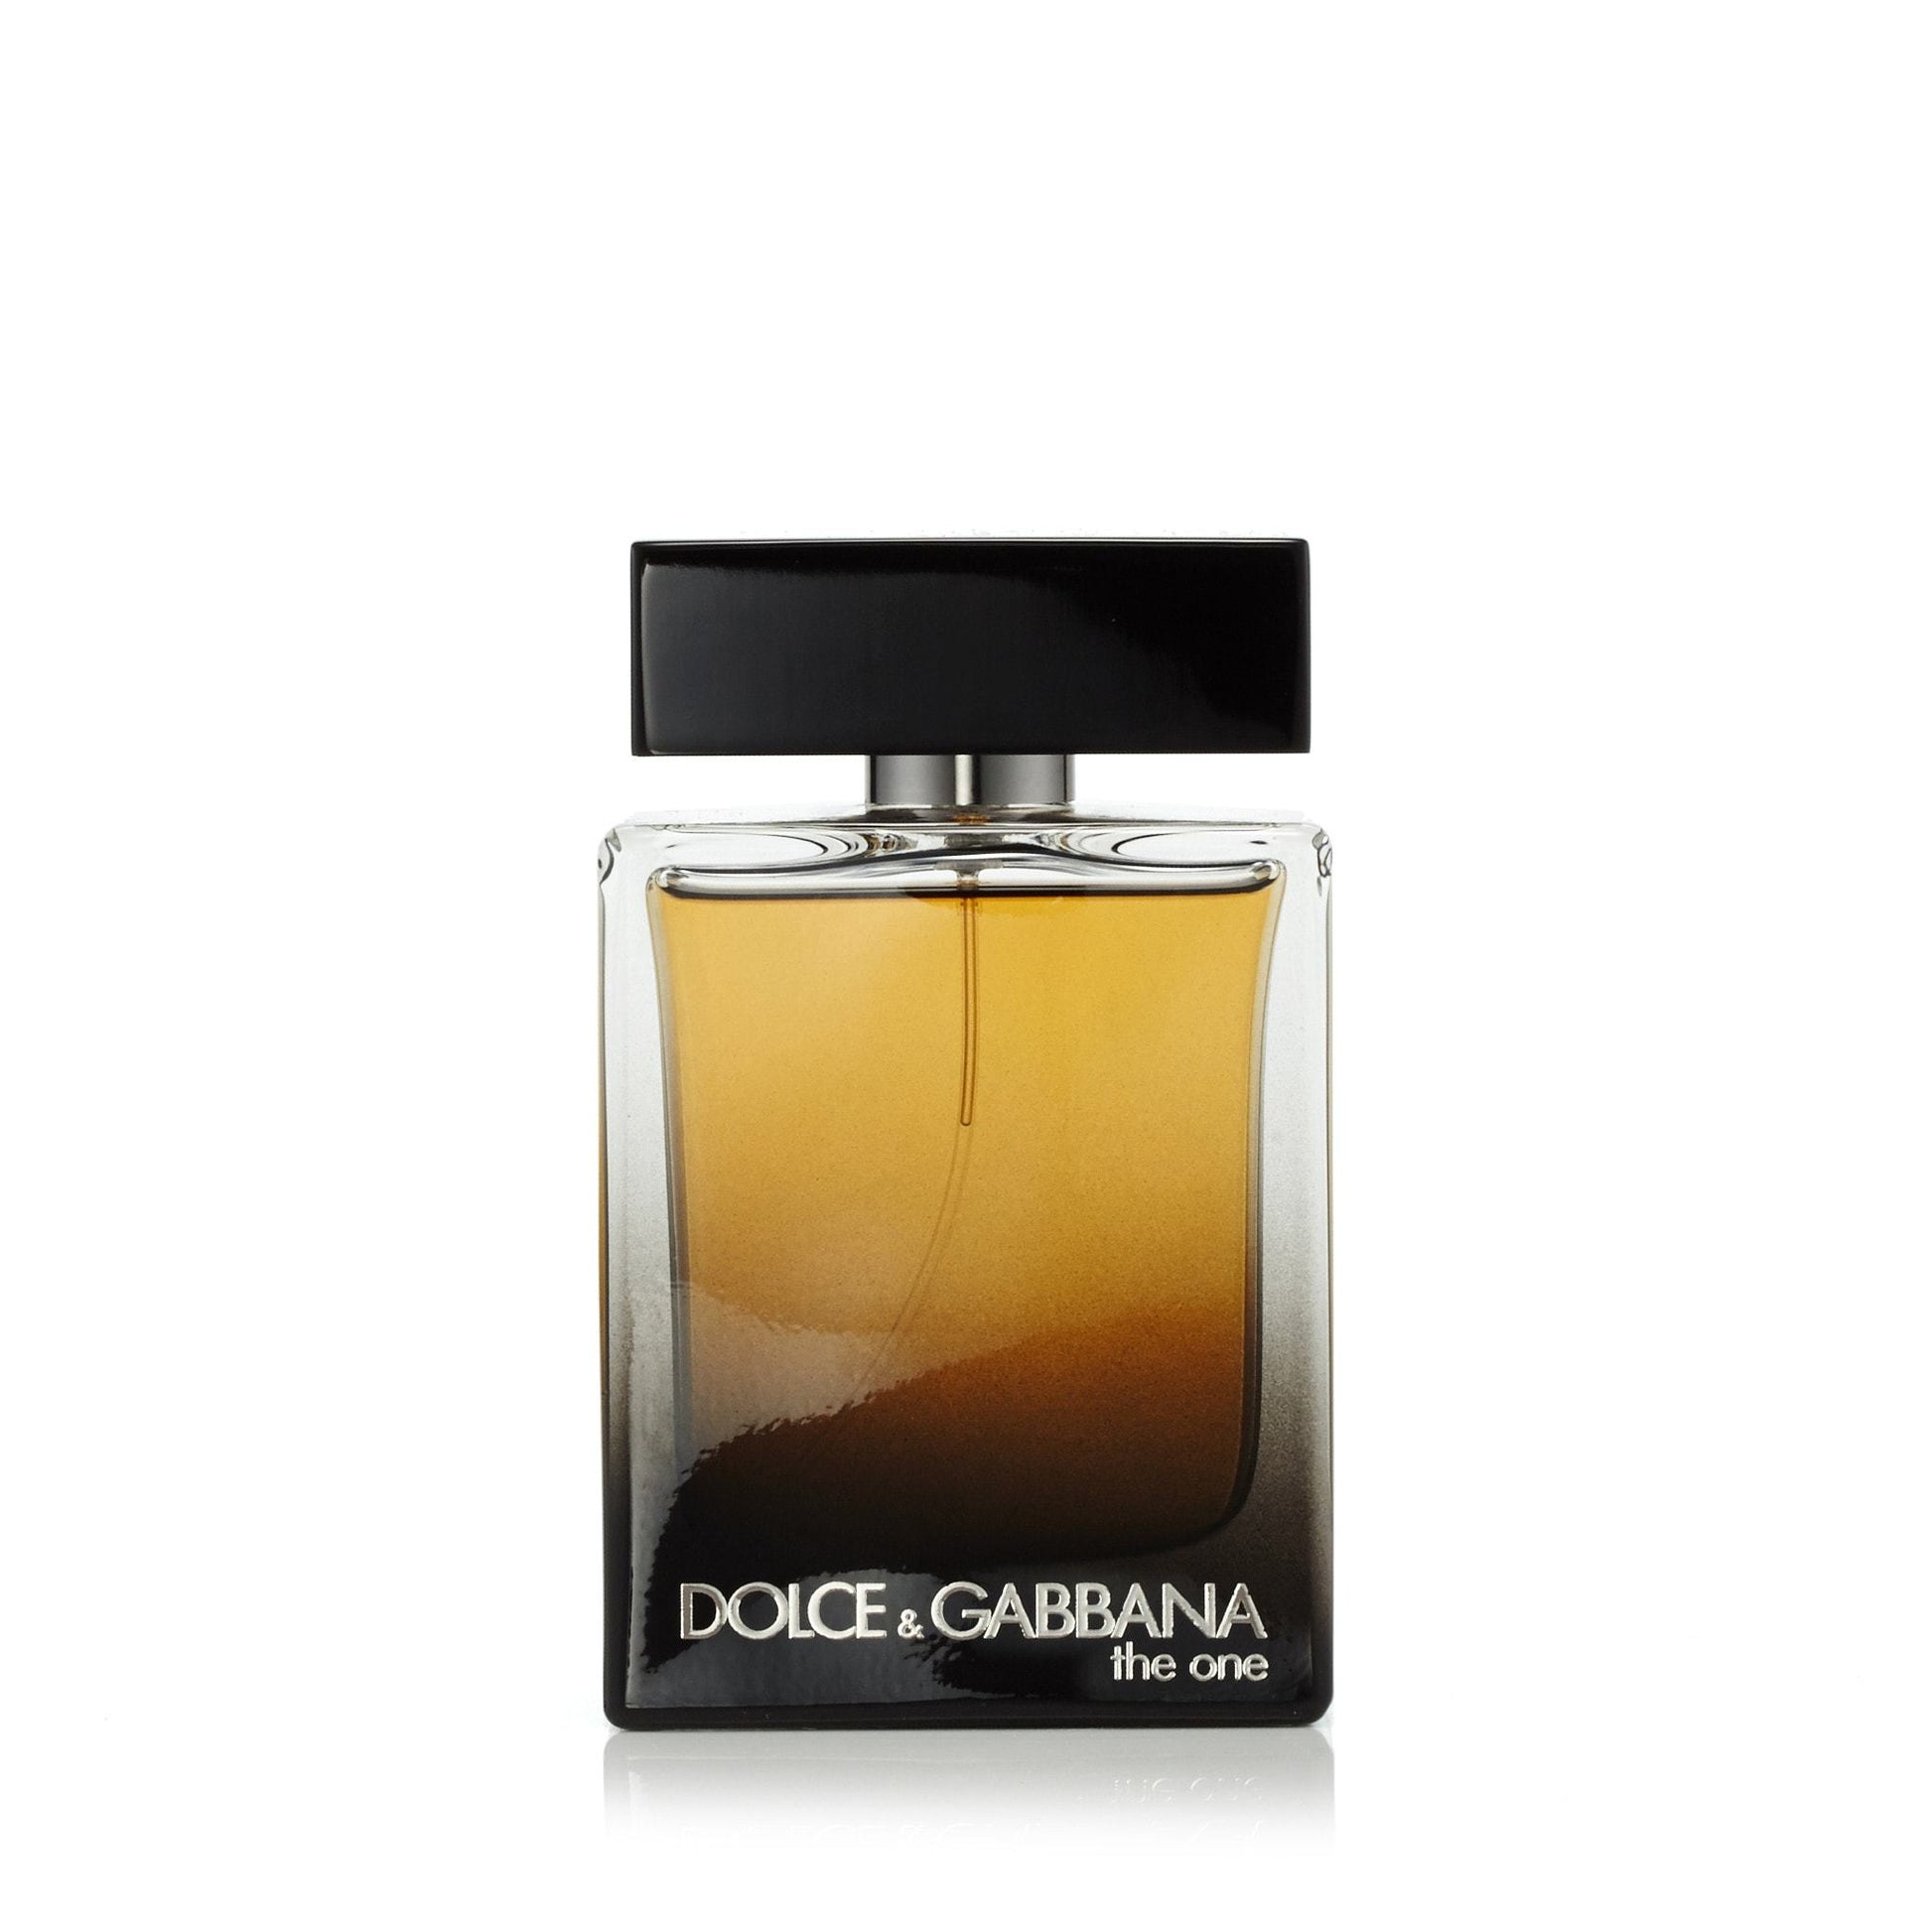 The One Eau de Parfum Spray for Men by Dolce and Gabbana, Product image 3